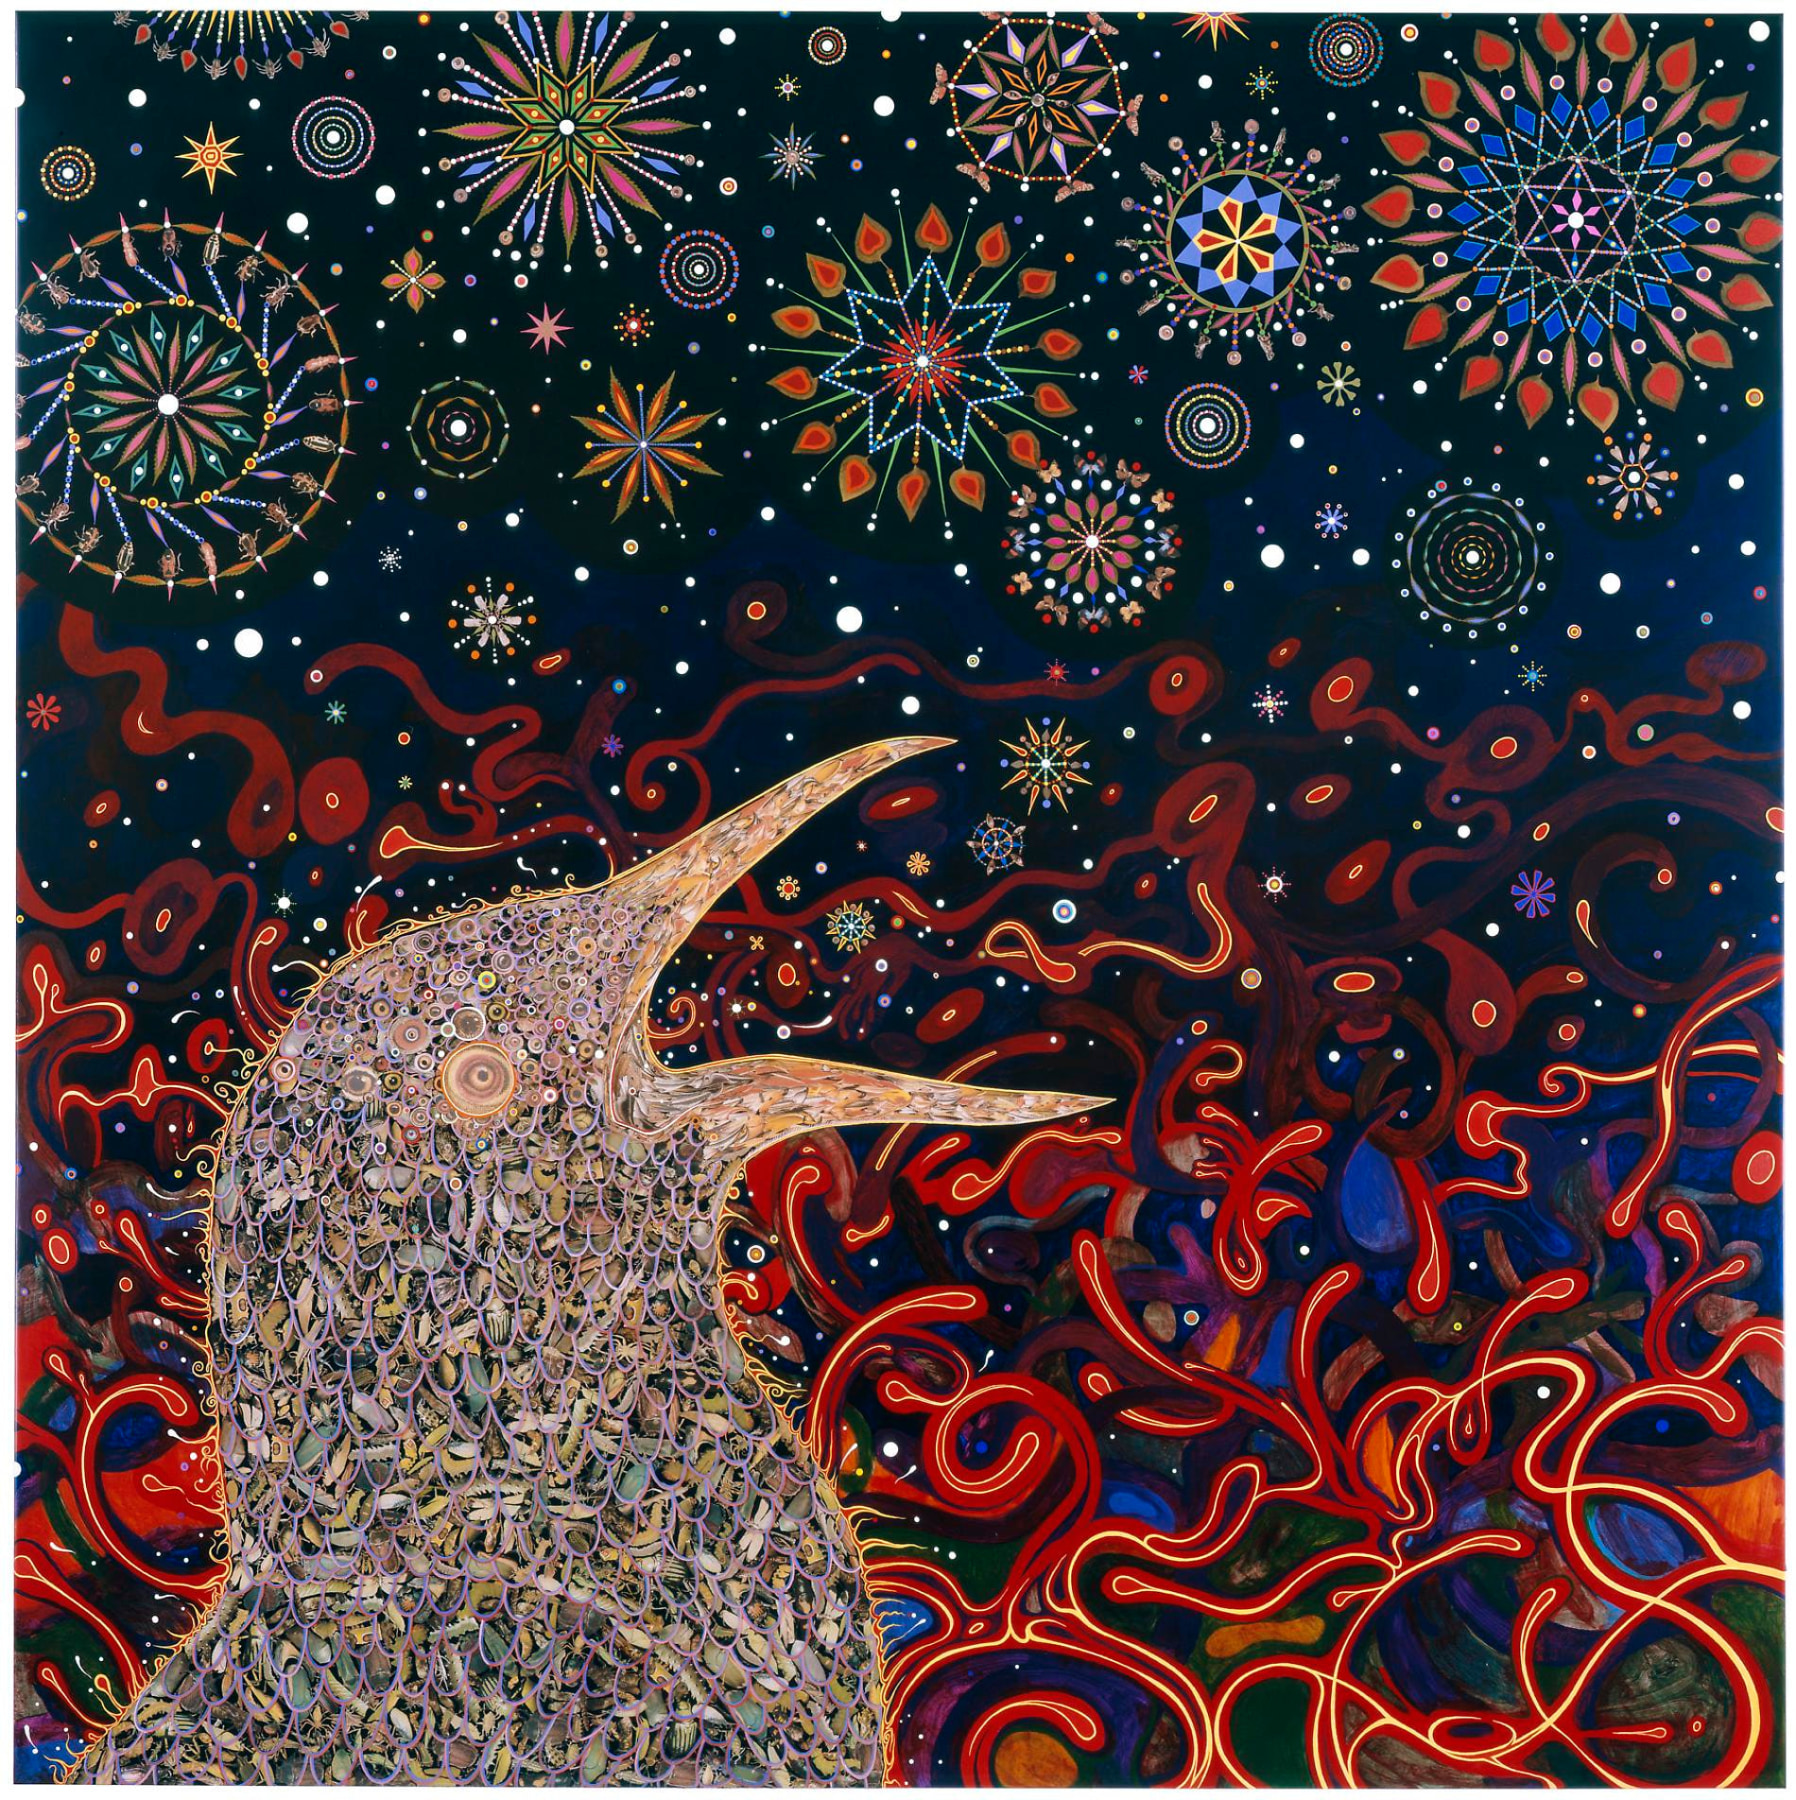 Image of FRED TOMASELLI's Starling,&nbsp;2010